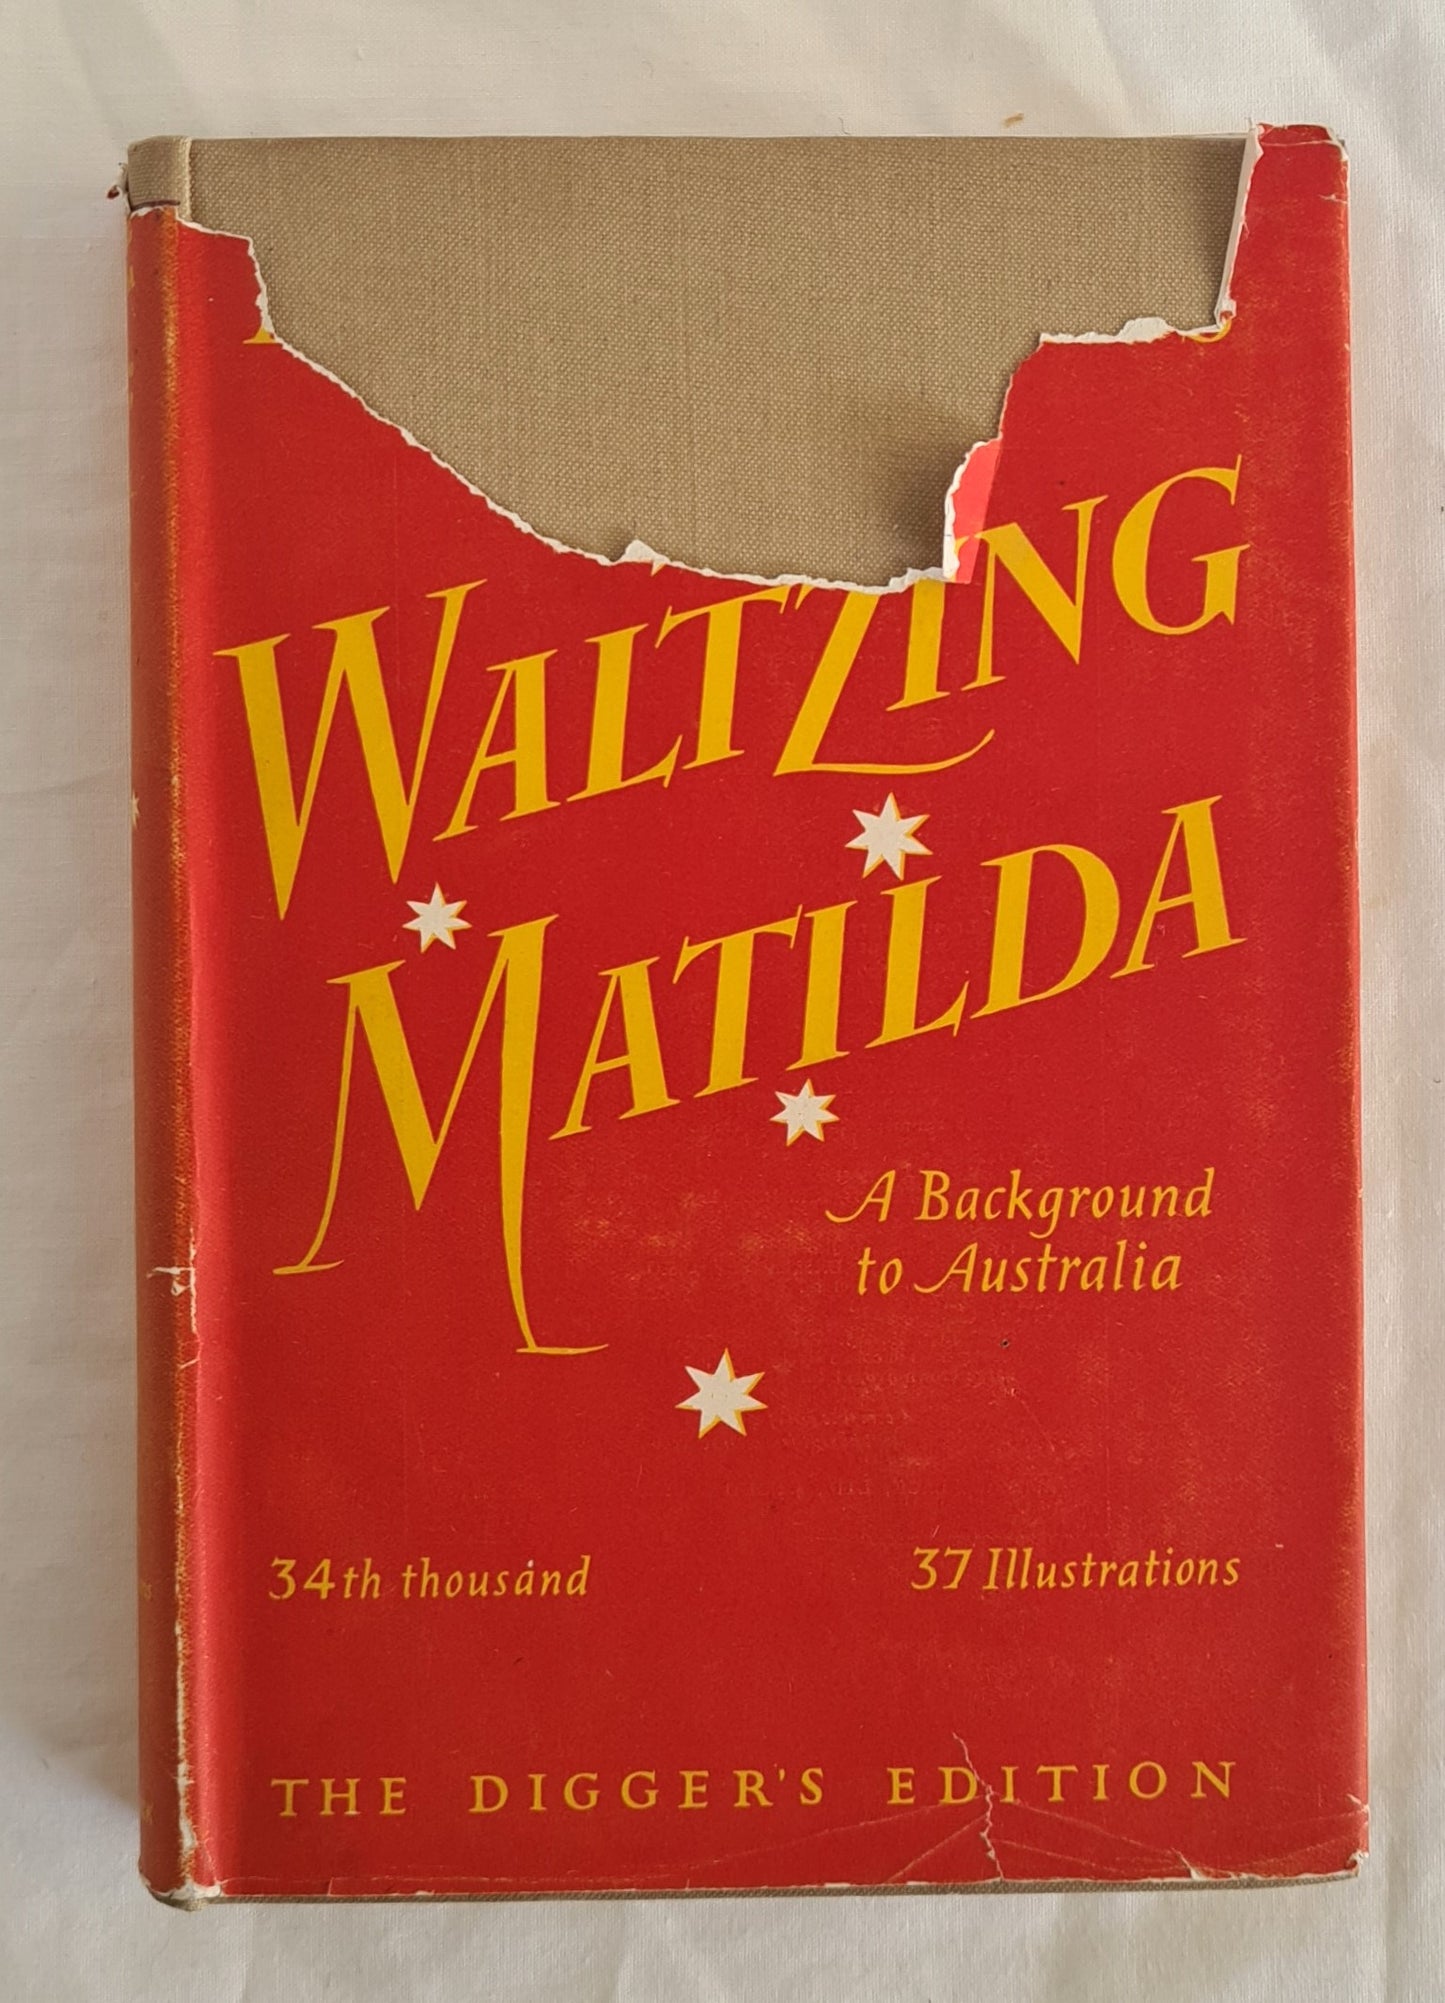 Waltzing Matilda  A Background to Australia  by Arnold L. Haskell  The Diggers’ Edition